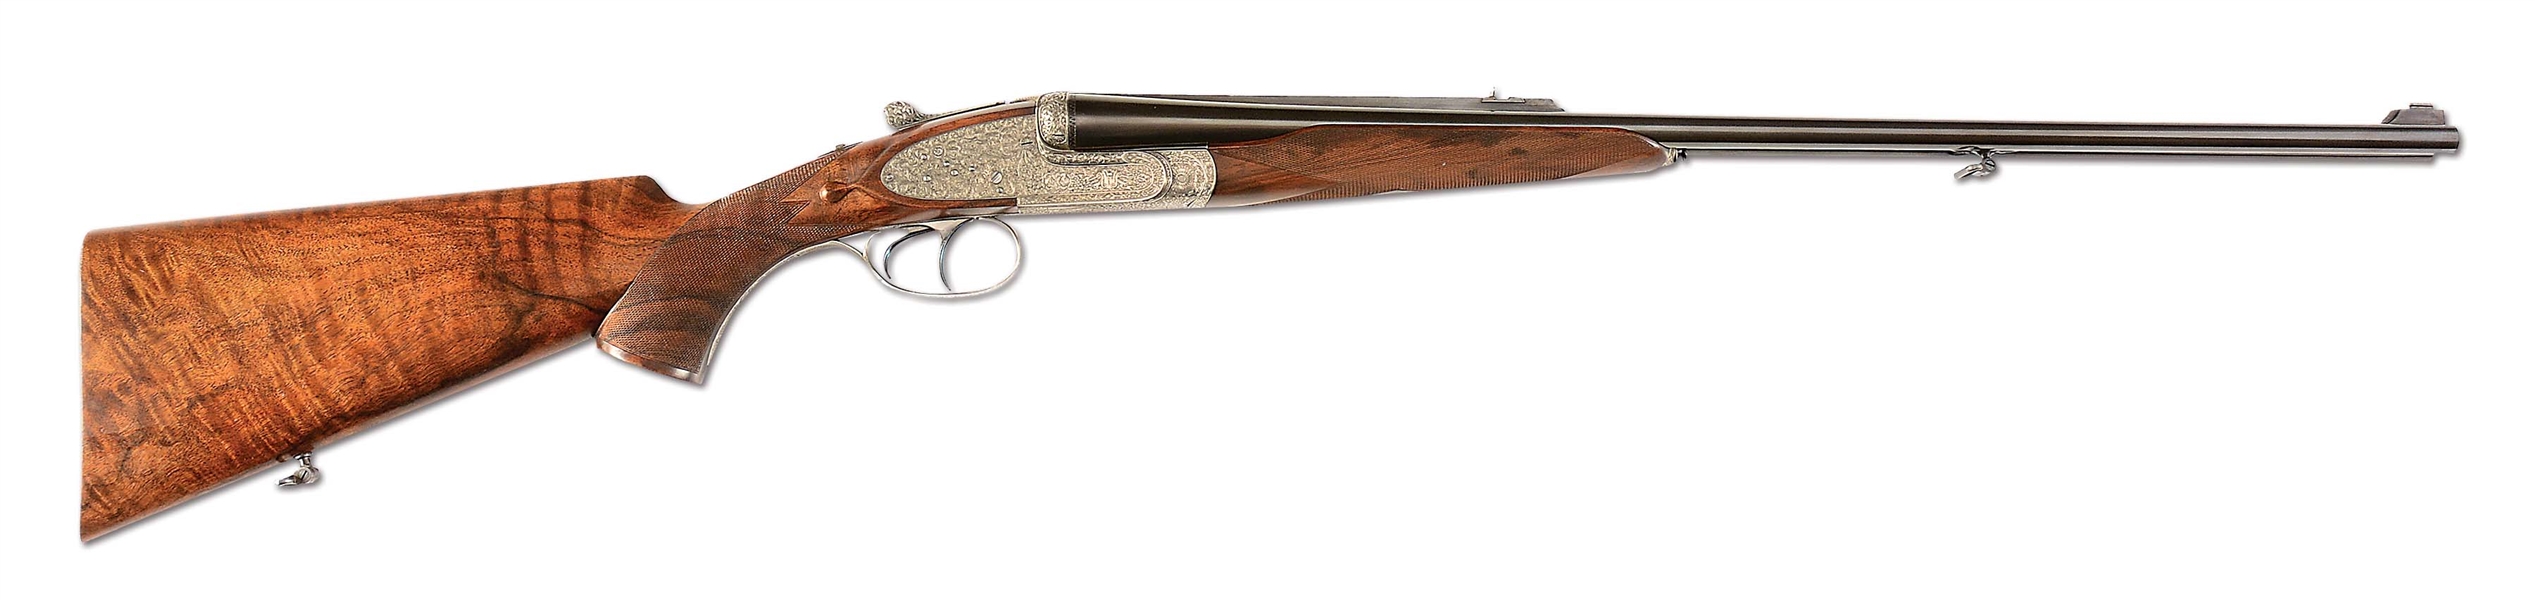 (M) SUPERB "LEBEAU COURALLY" TYPE SIDELOCK EJECTOR DOUBLE RIFLE IN 9.3X74R WITH BAROQUE ENGRAVING BY CAPECE.